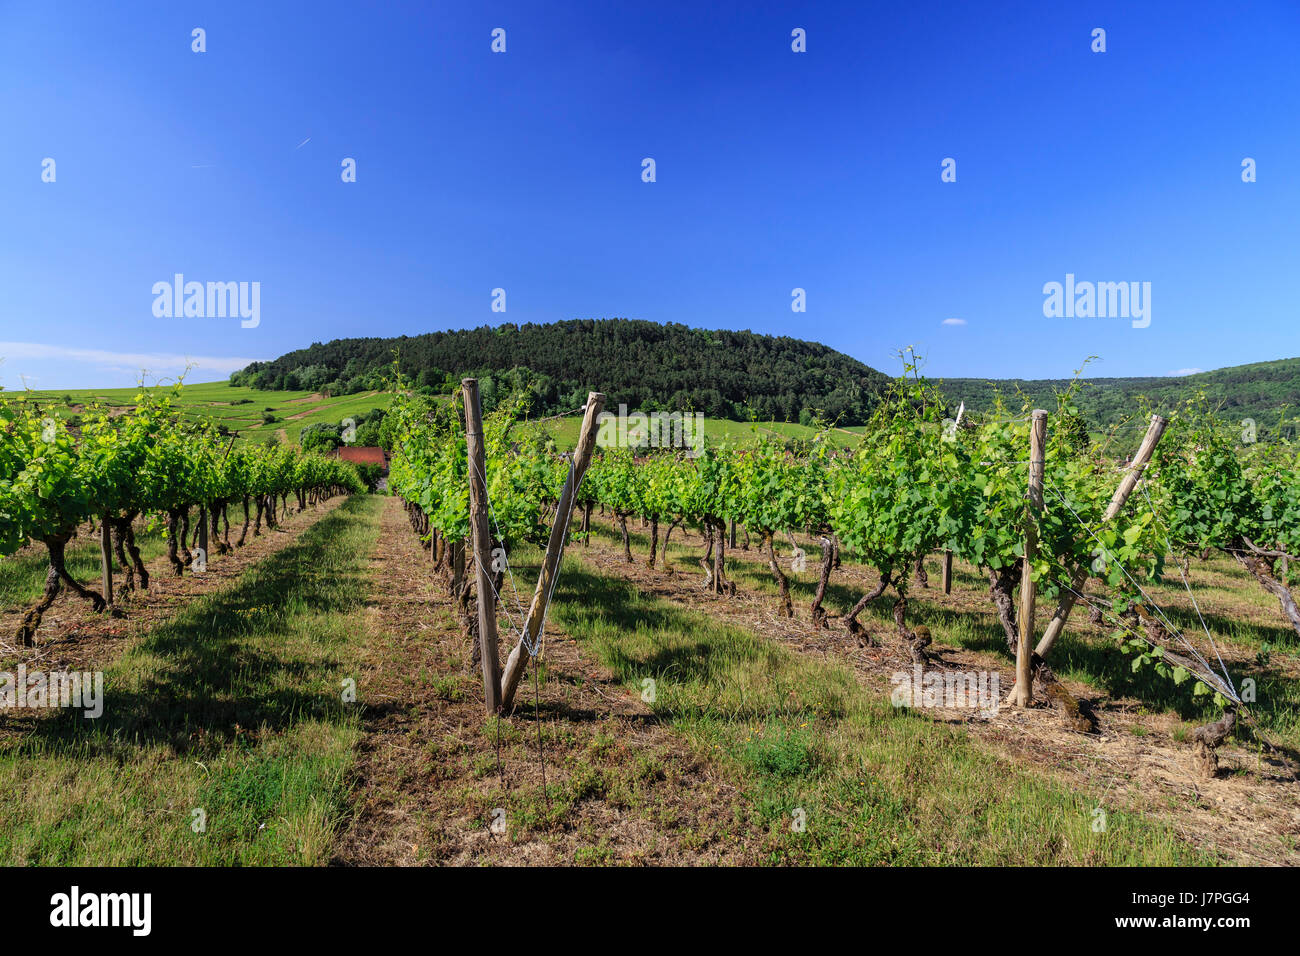 France, Cote d'Or, Burgundy region, Auxey-Duresses, vineyard Stock Photo